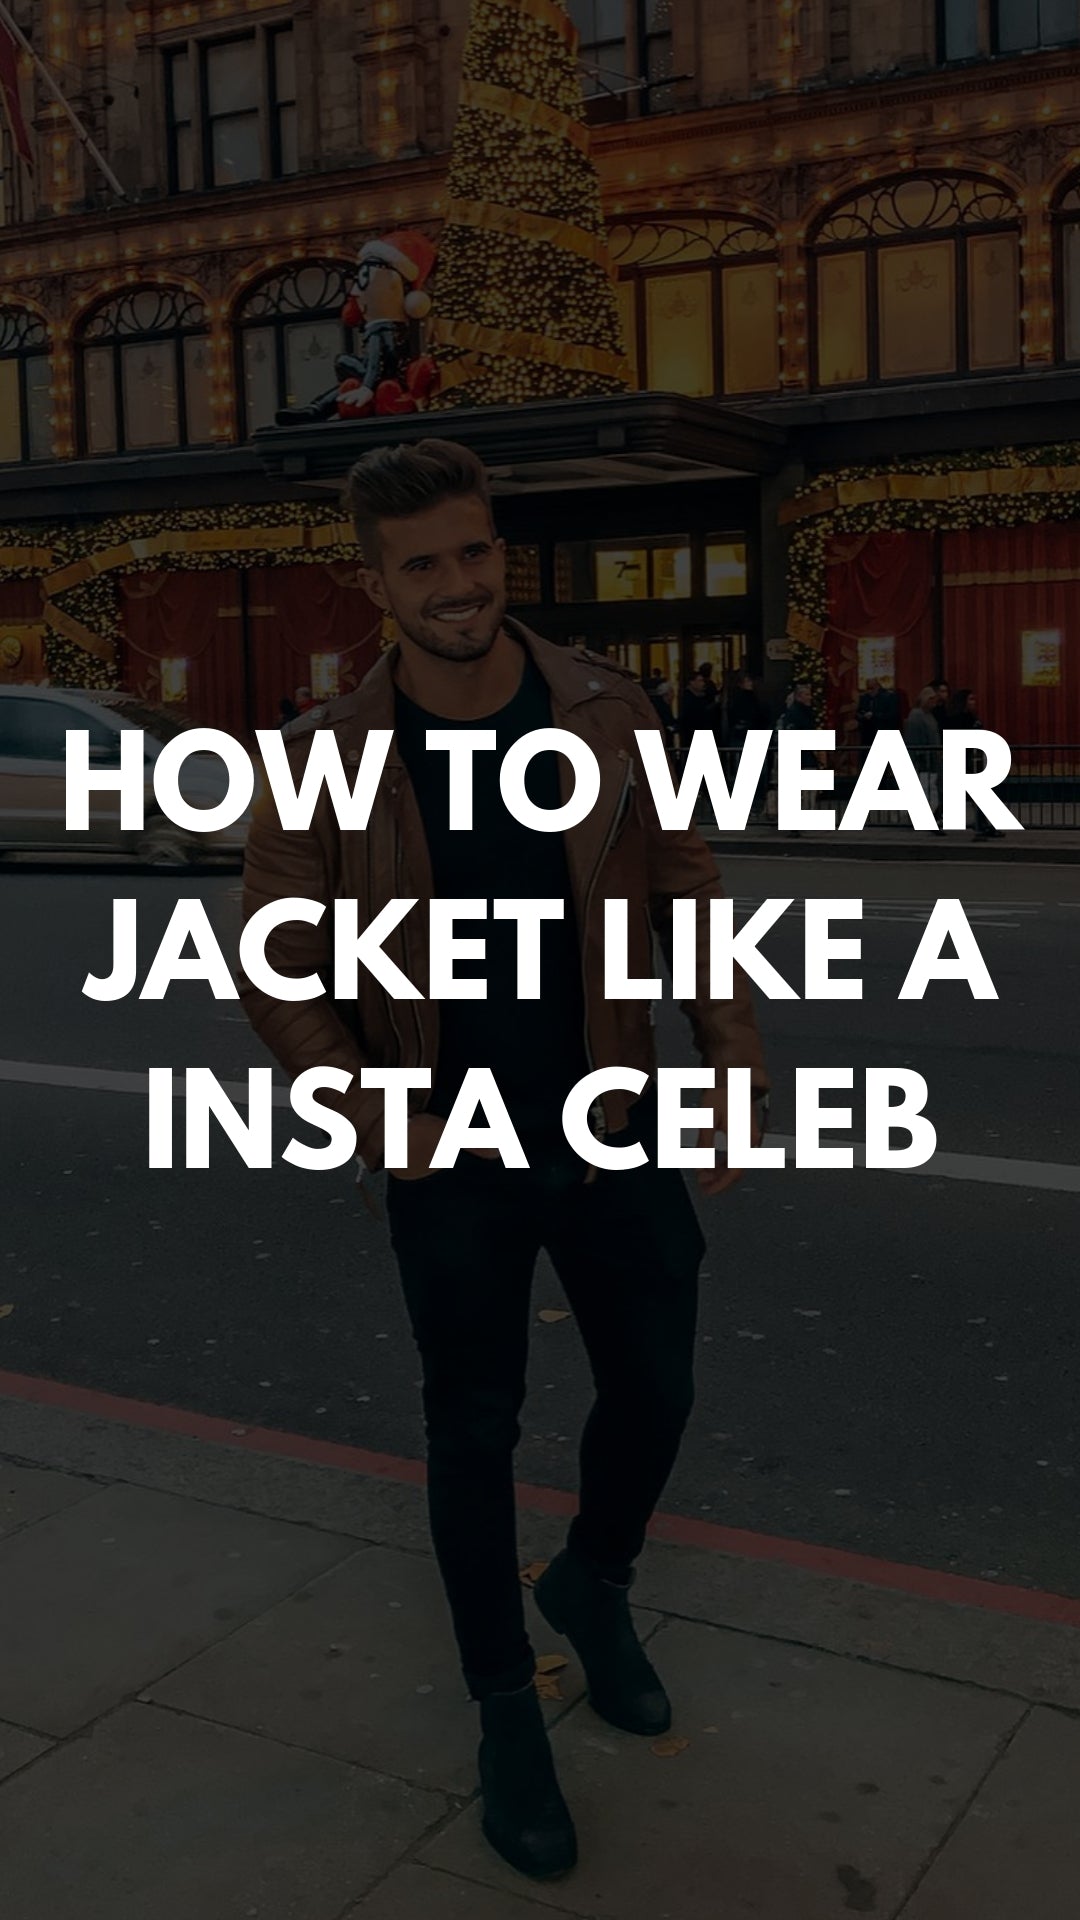 How To Wear Jackets Like A Insta Celeb - LIFESTYLE BY PS